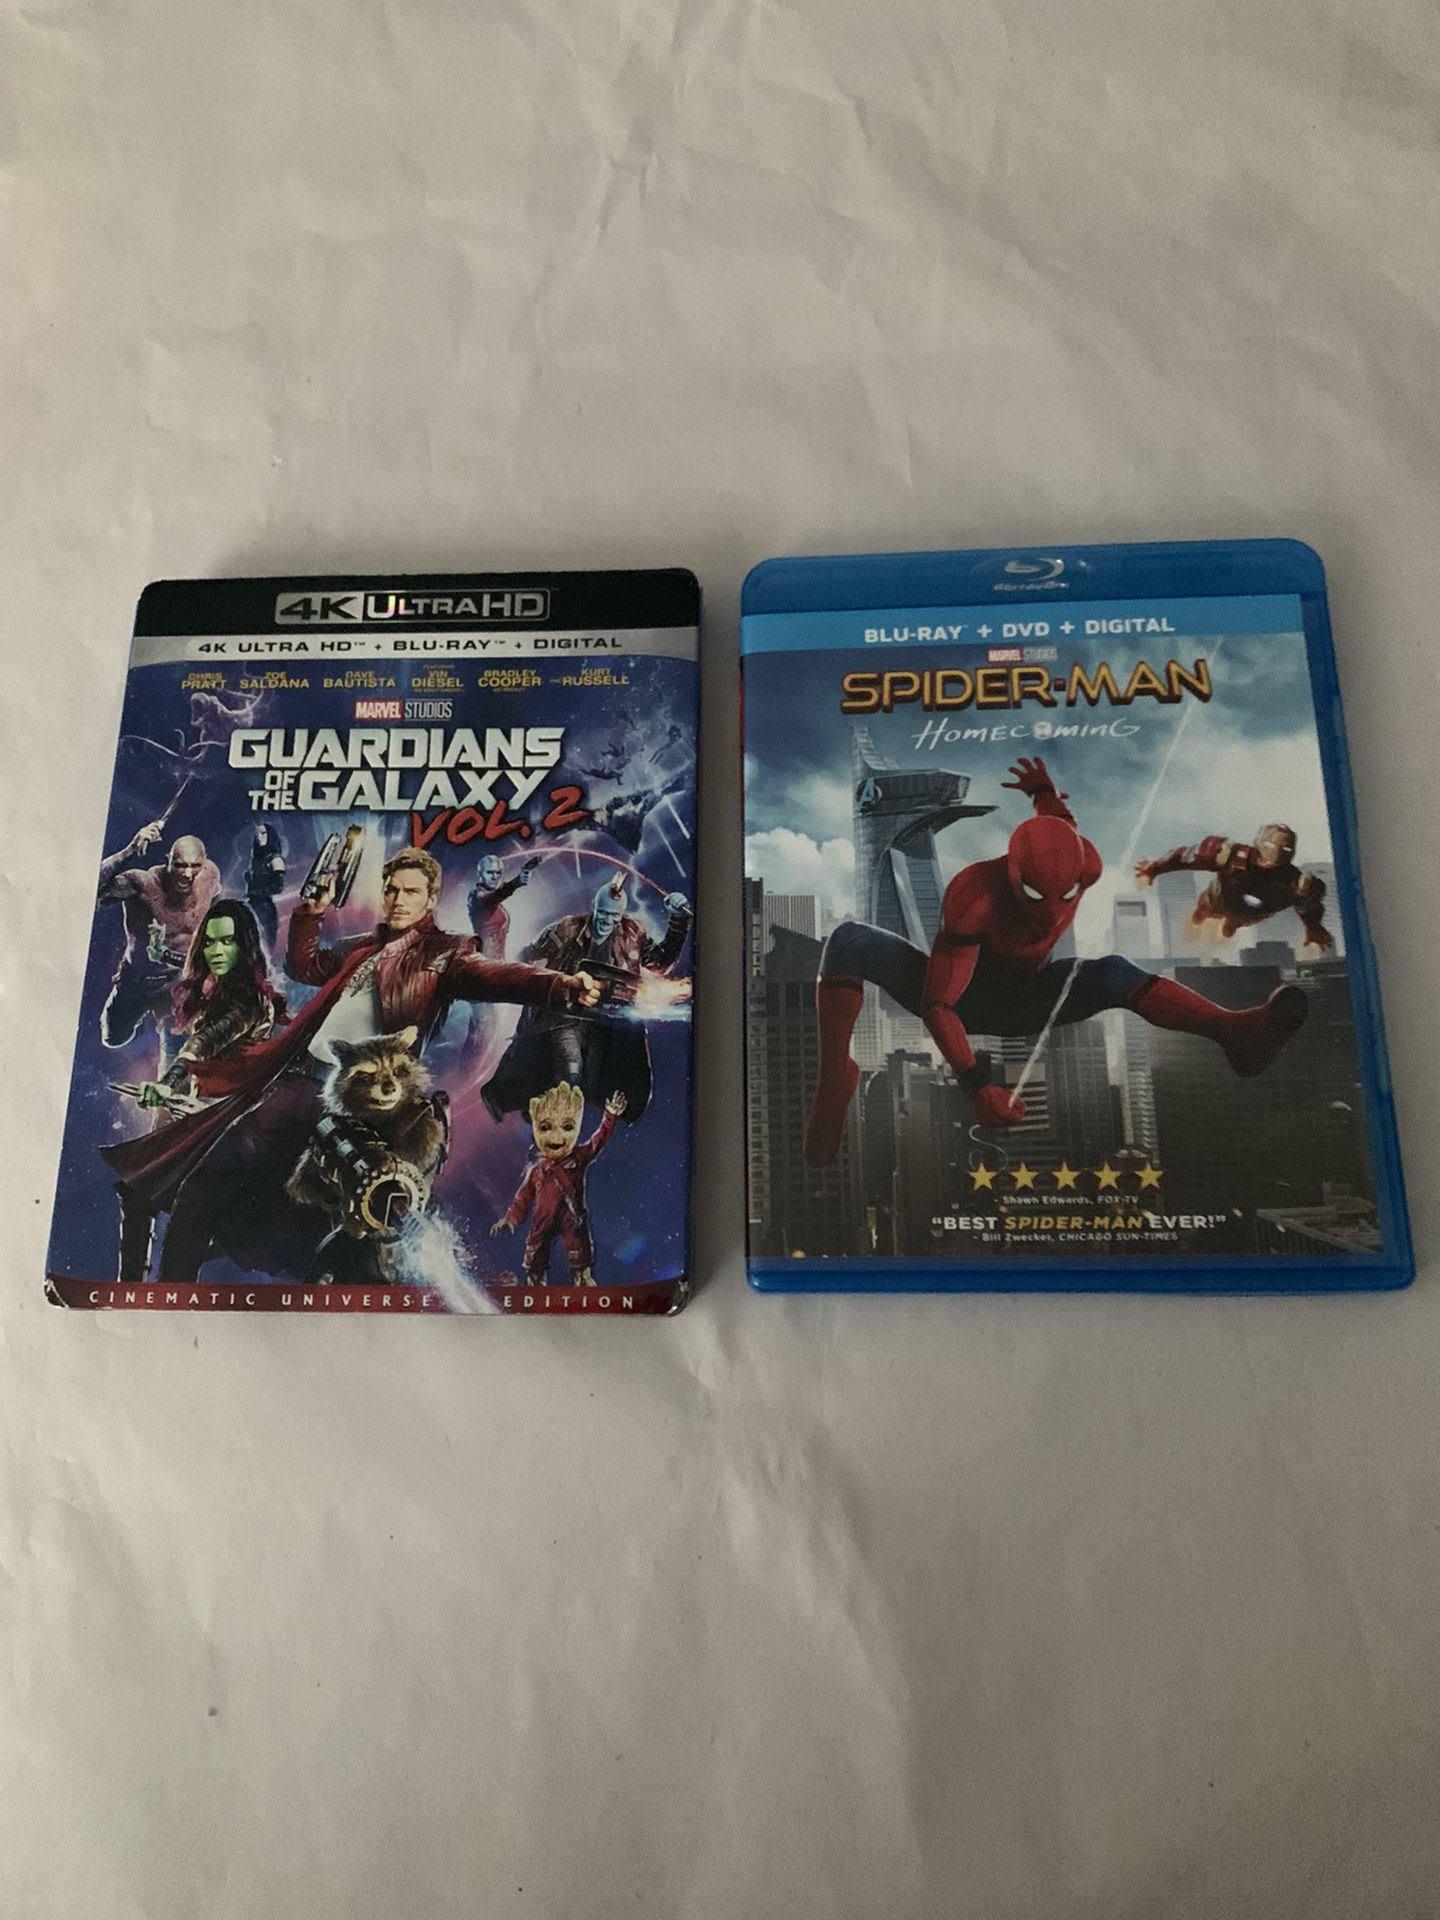 Spider-Man Homecoming & Guardians of the Galaxy Vol2 DVD/Blu-Ray Bundle